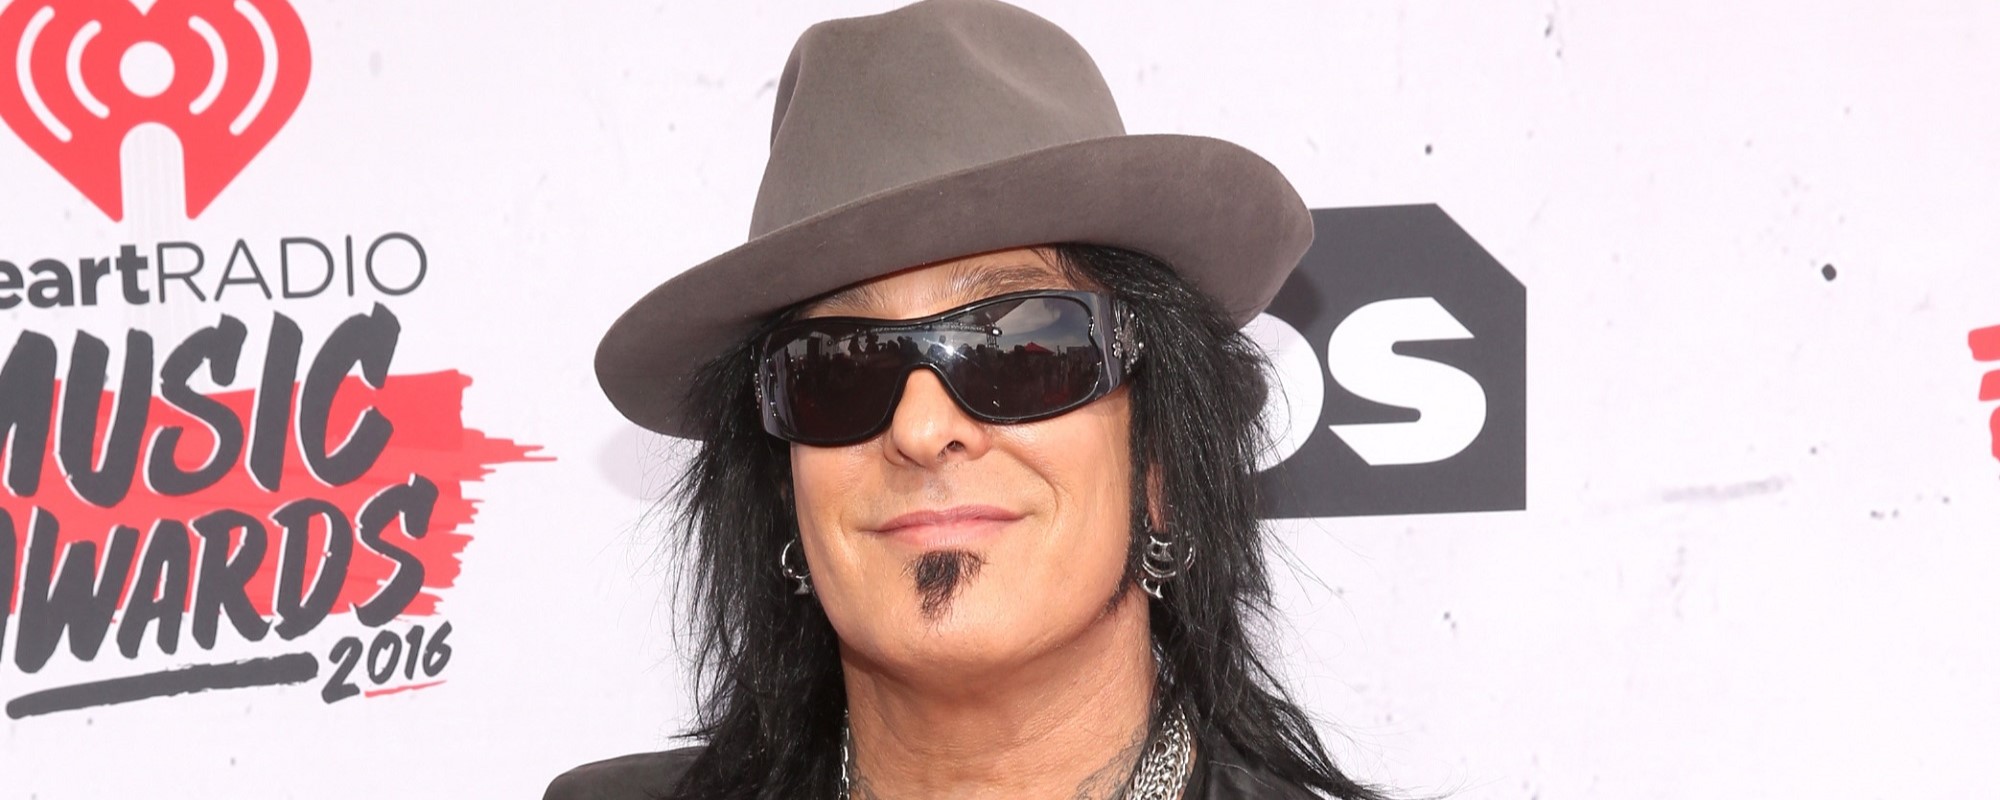 Mötley Crüe’s Nikki Sixx Shares Updates About Alleged Stalkers: “When Your Daughter and Wife Get Threatened All Bets Are Off”